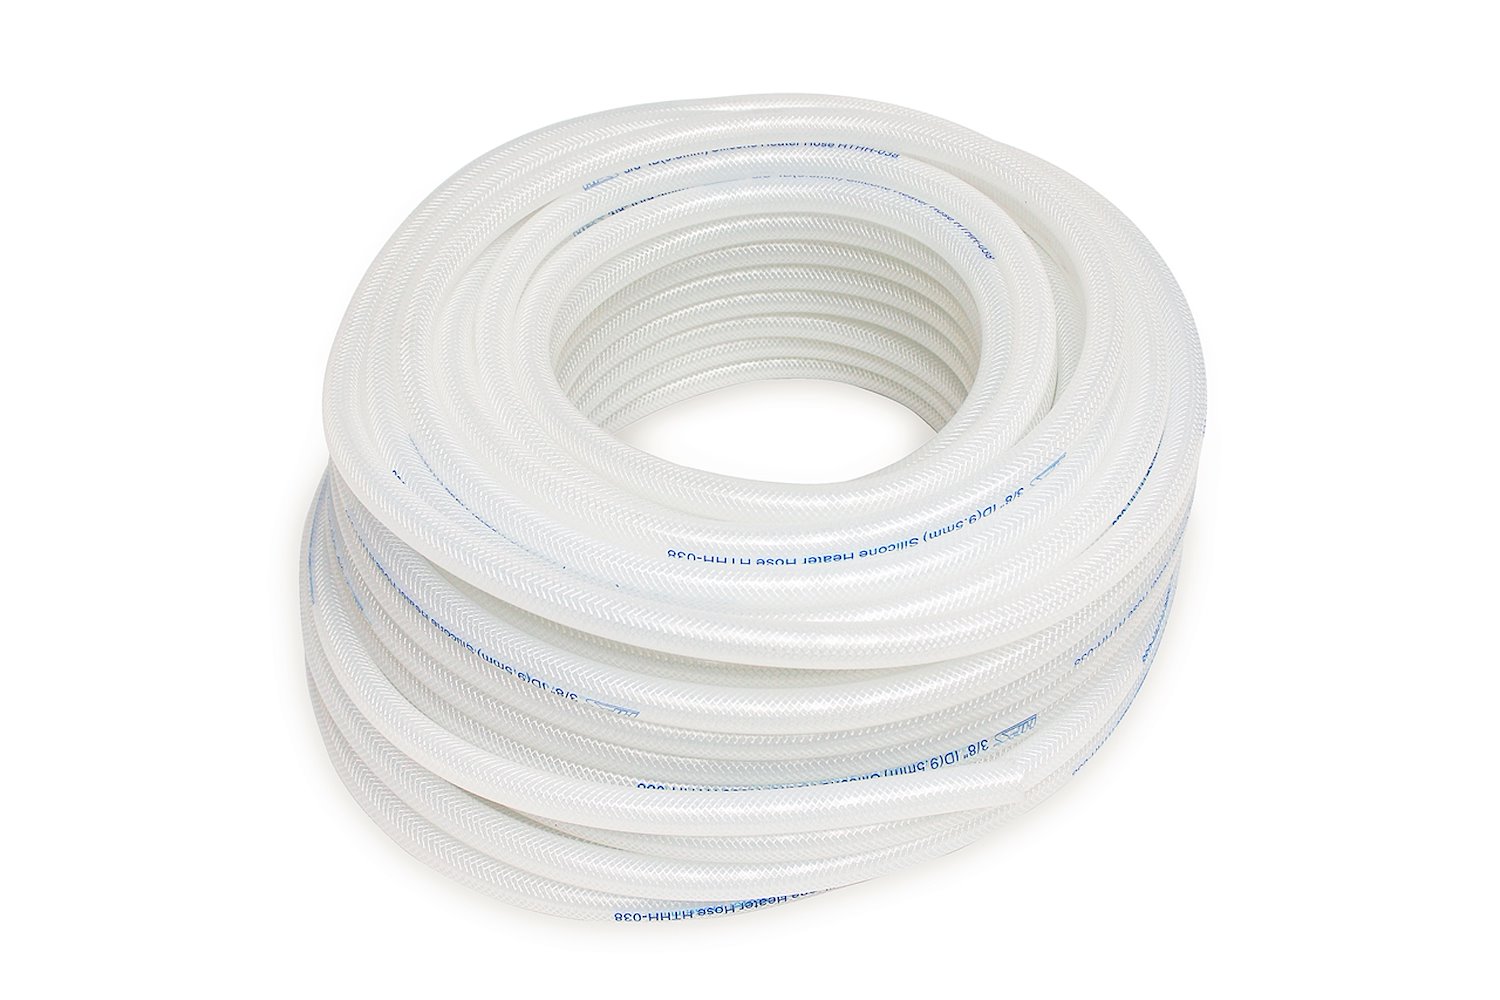 HTHH-038-CLEARx50 Silicone Heater Hose Tubing, High-Temp Reinforced, 3/8 in. ID, 50 ft. Roll, Clear